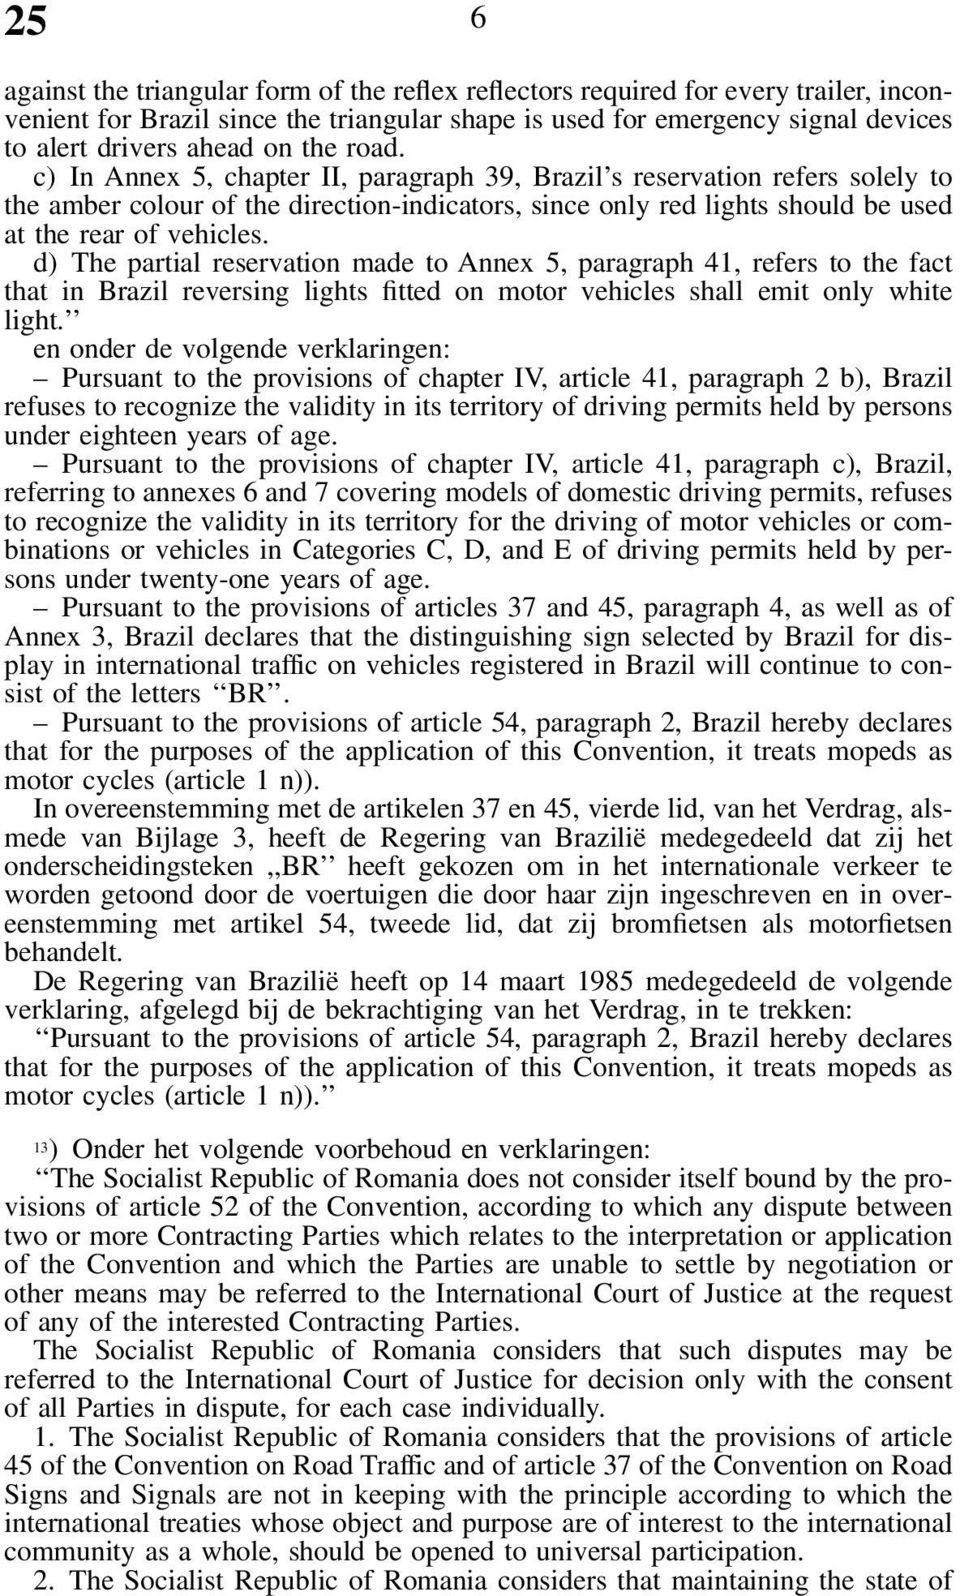 d) The partial reservation made to Annex 5, paragraph 41, refers to the fact that in Brazil reversing lights fitted on motor vehicles shall emit only white light.